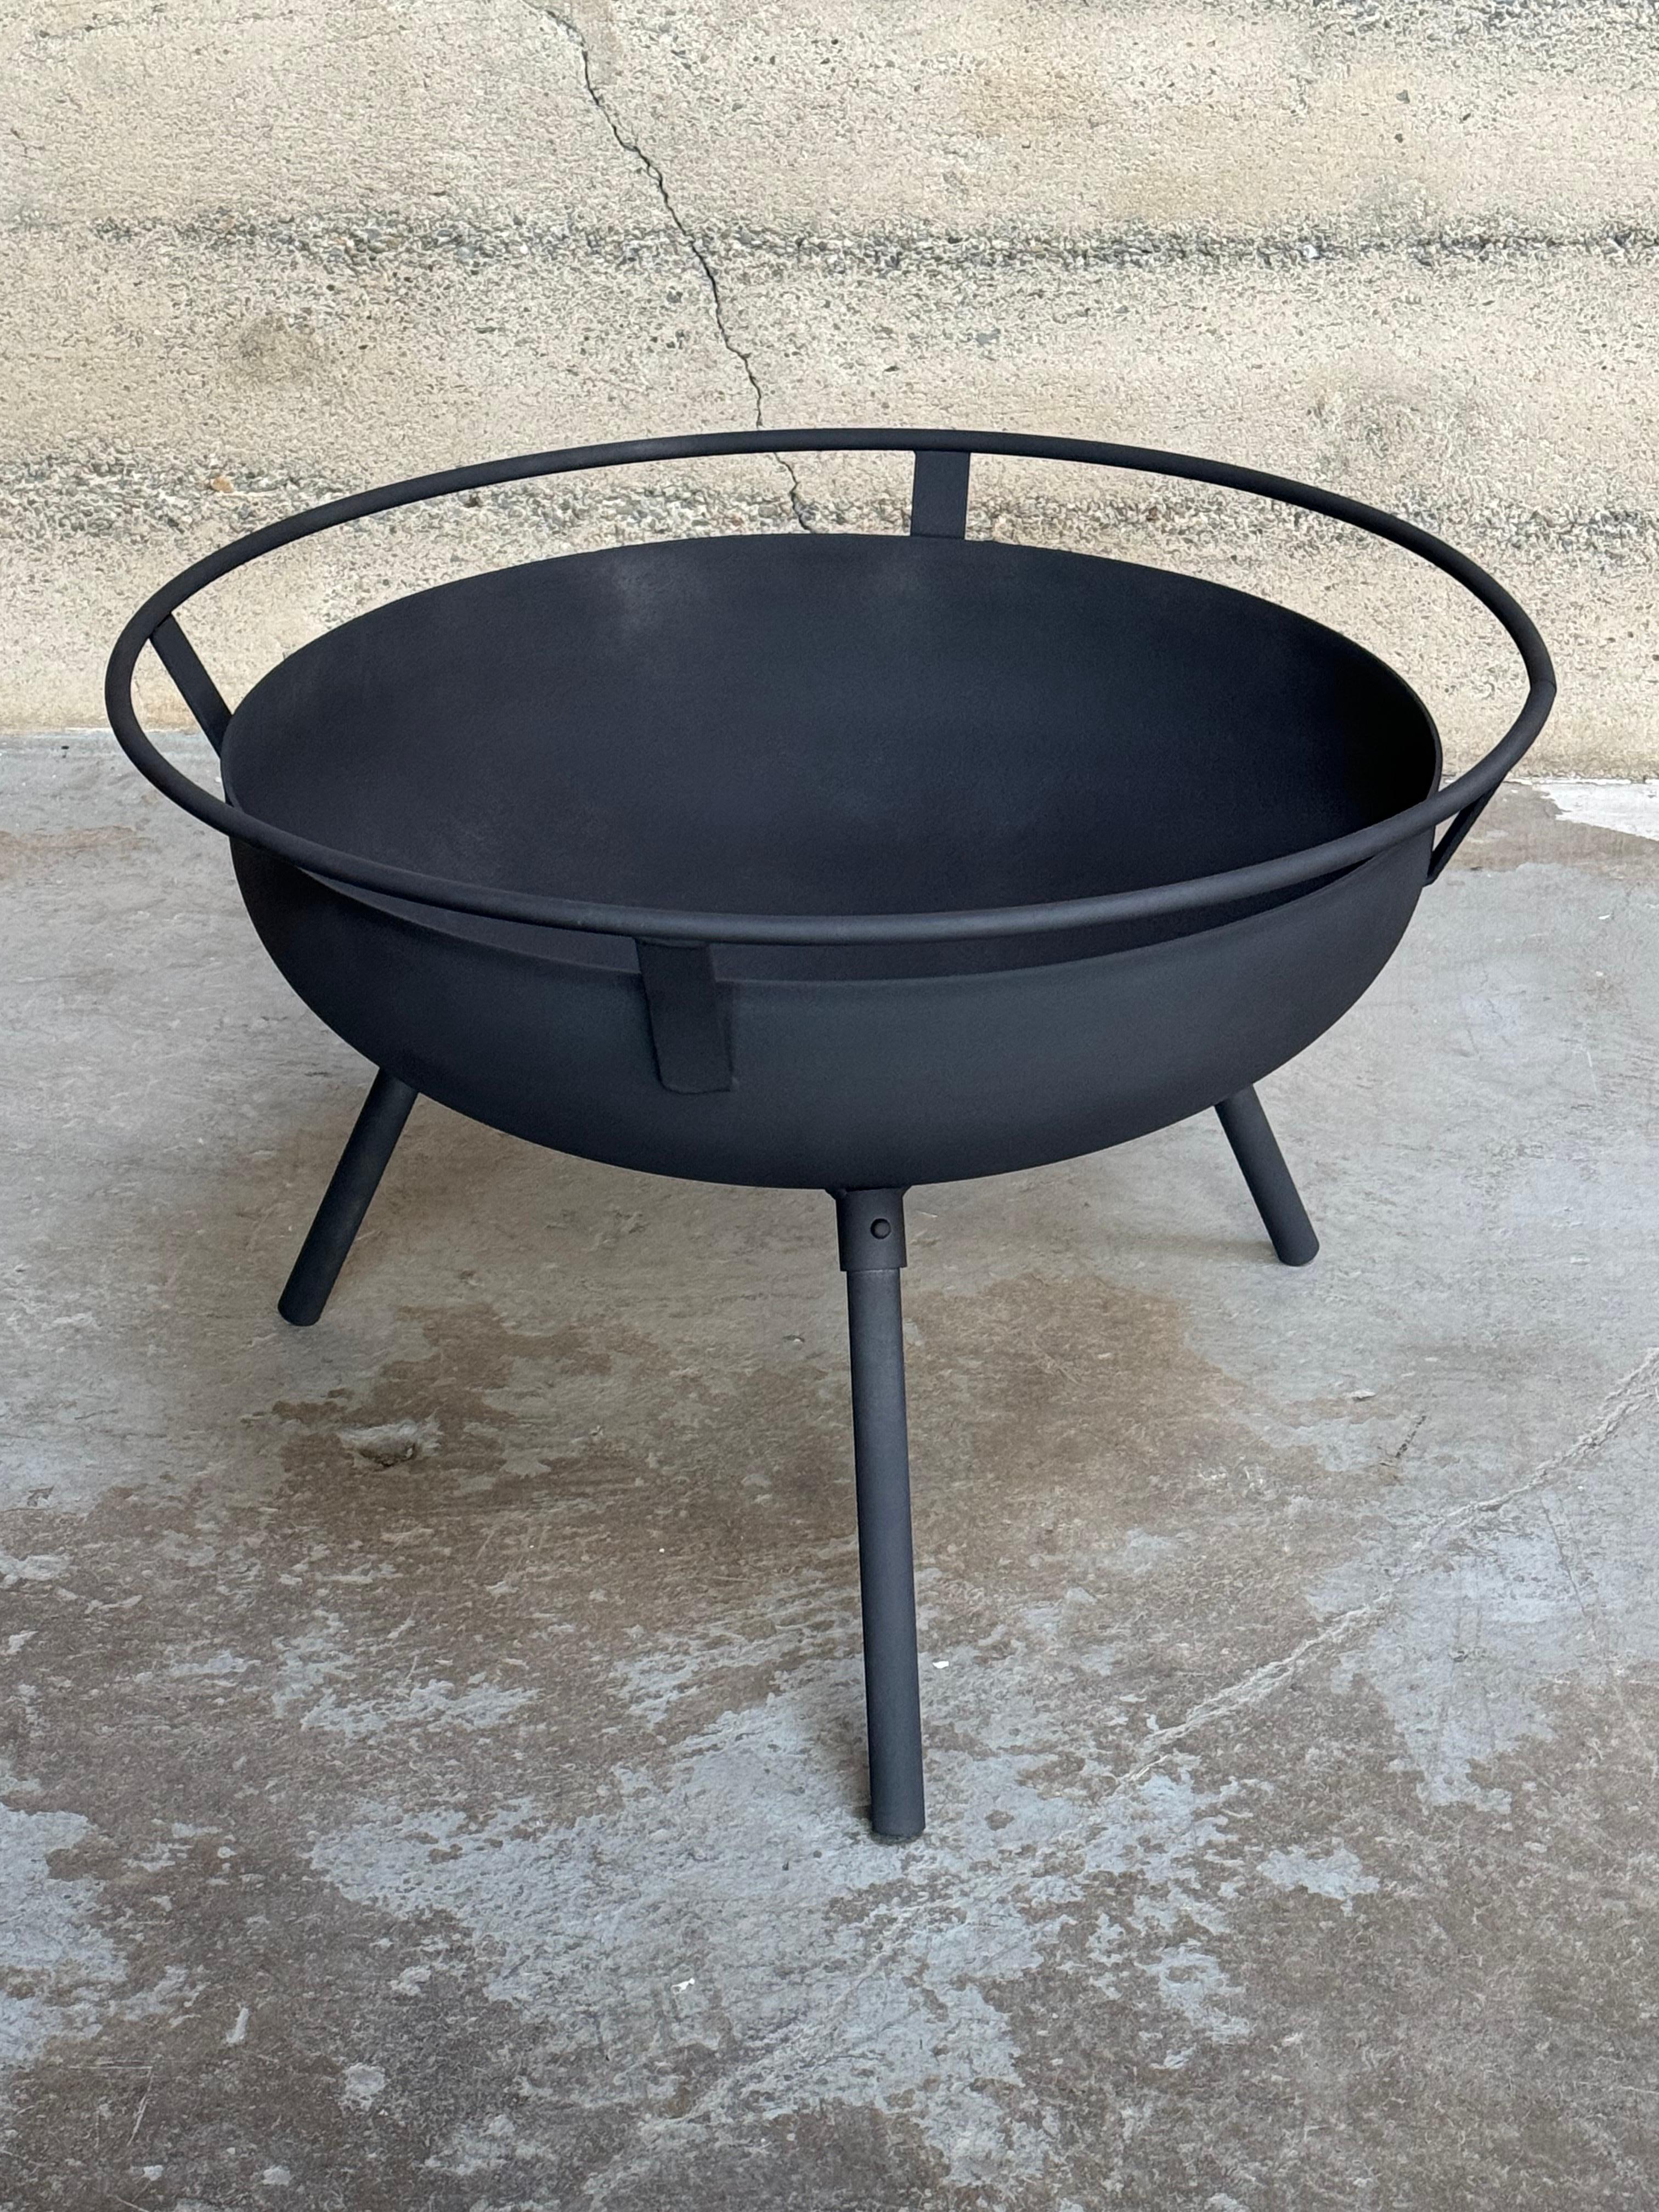 Mid-20th Century Modernist Design 1950s Three Legged Iron Fire Pit Case Study House For Sale